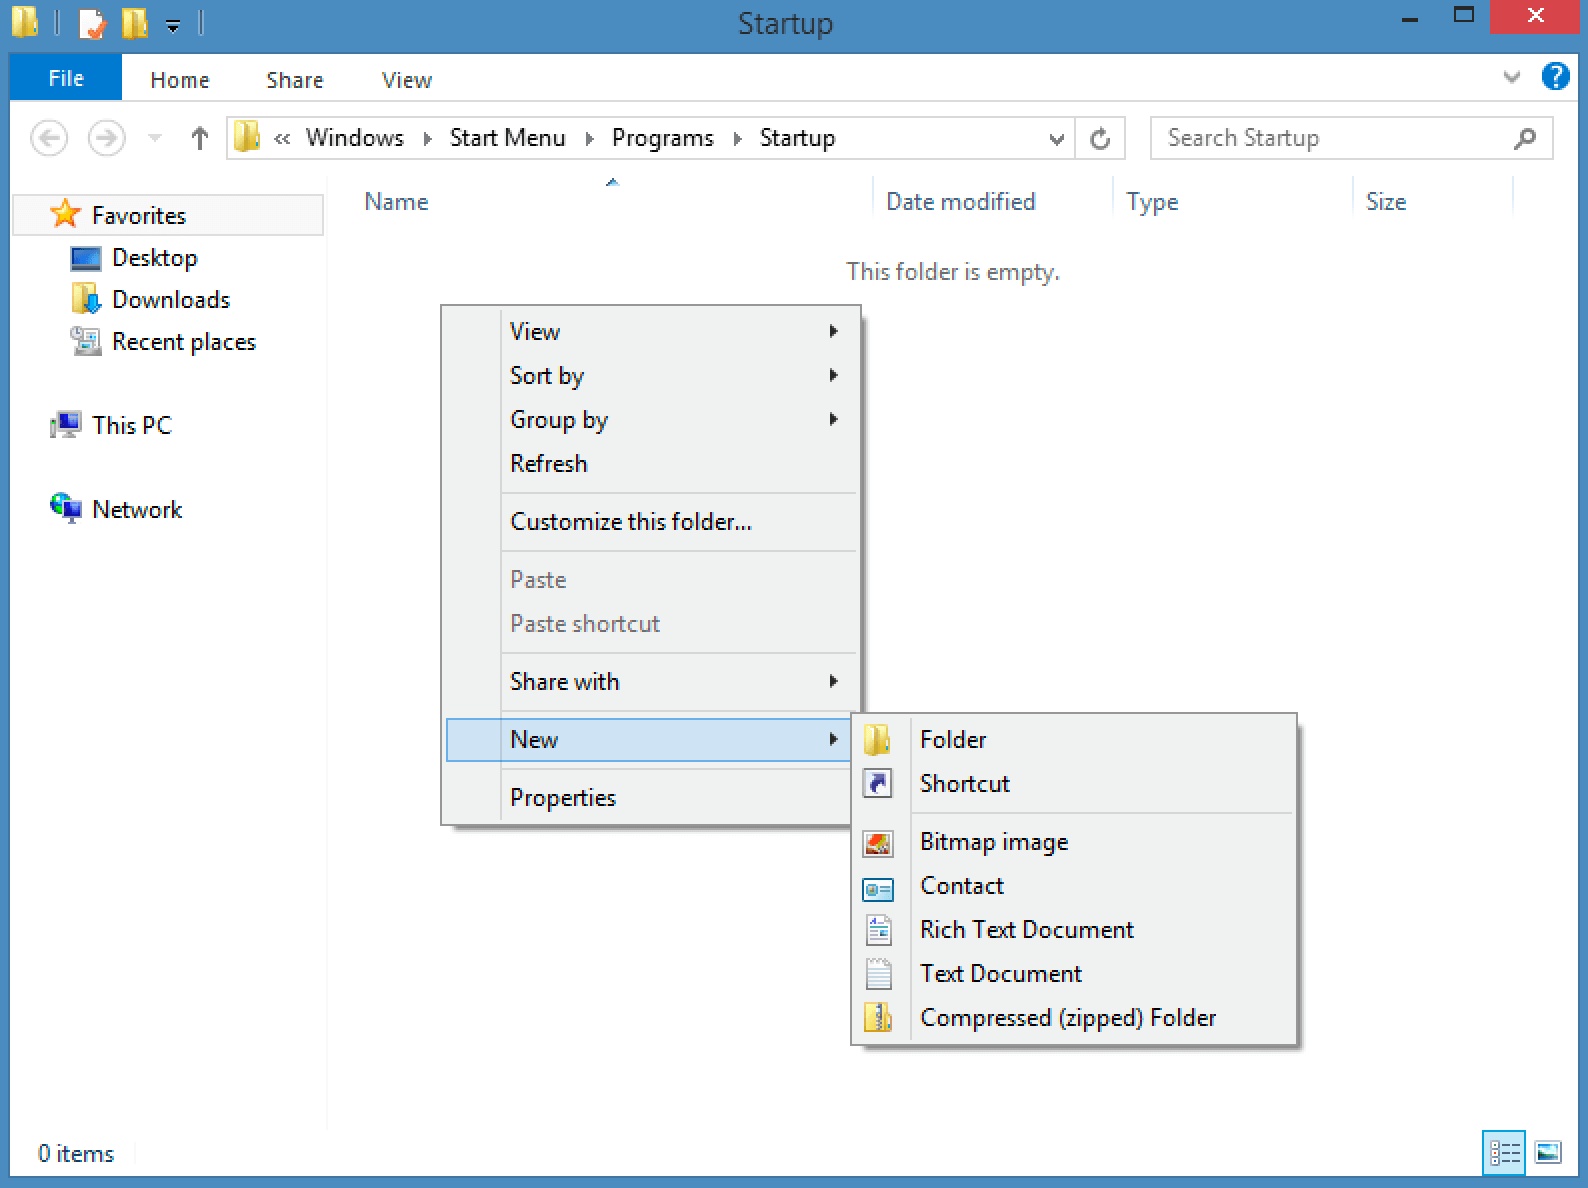 Screenshot of the startup folder with “New” selected